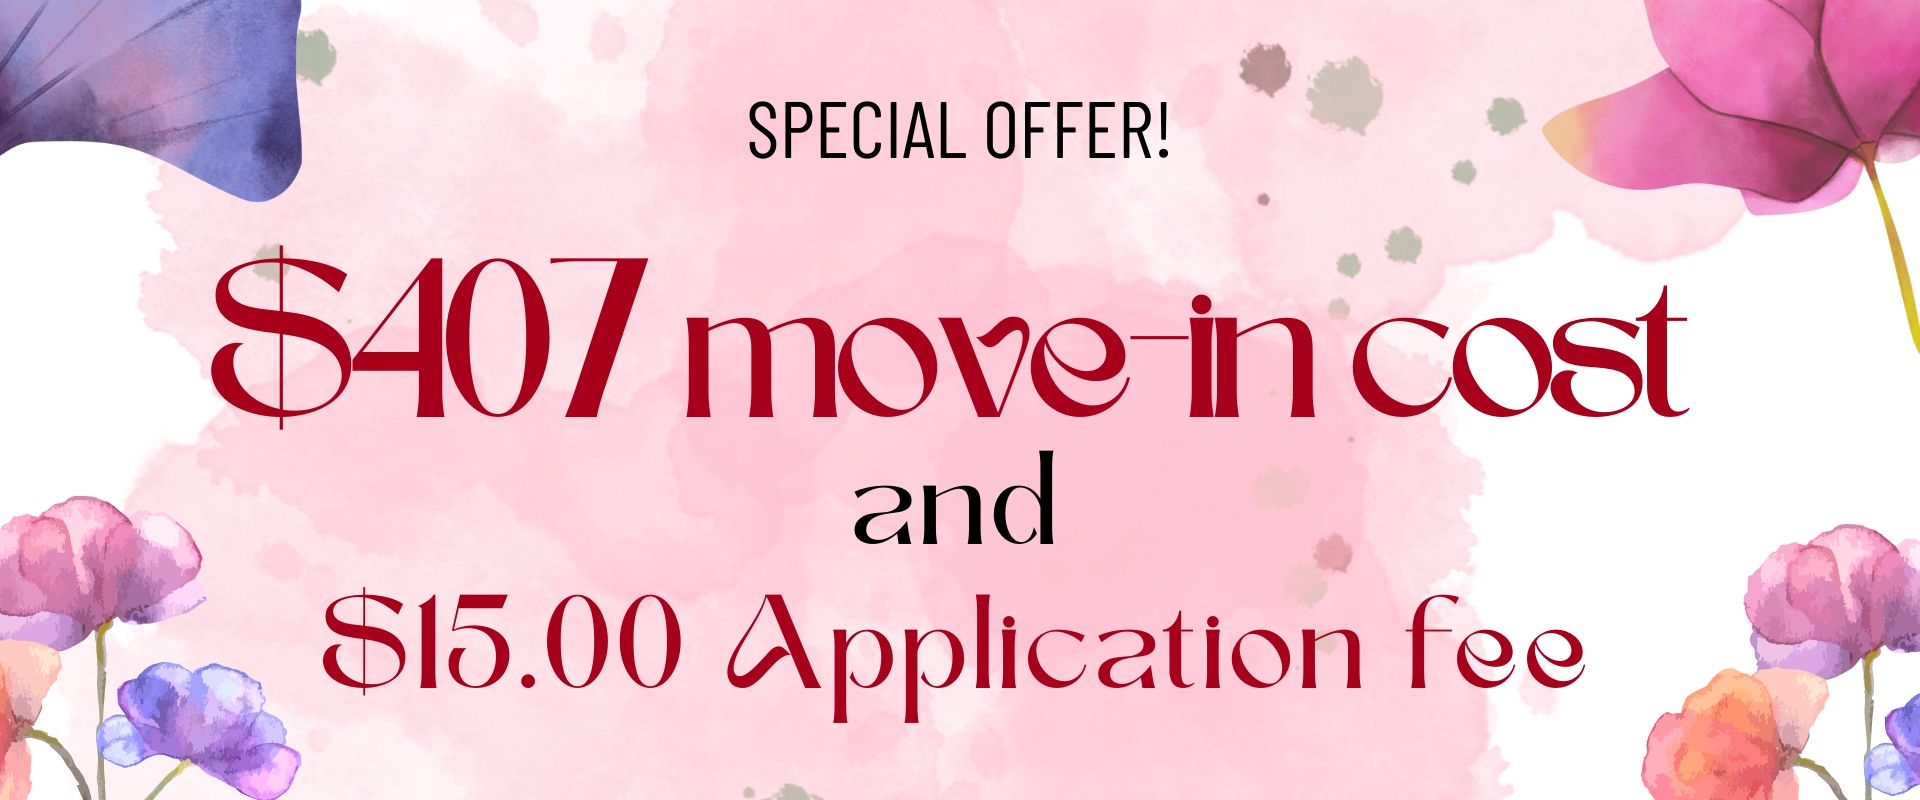 Special Offer   $407.00 move-in cost and   $15.00 Application fee